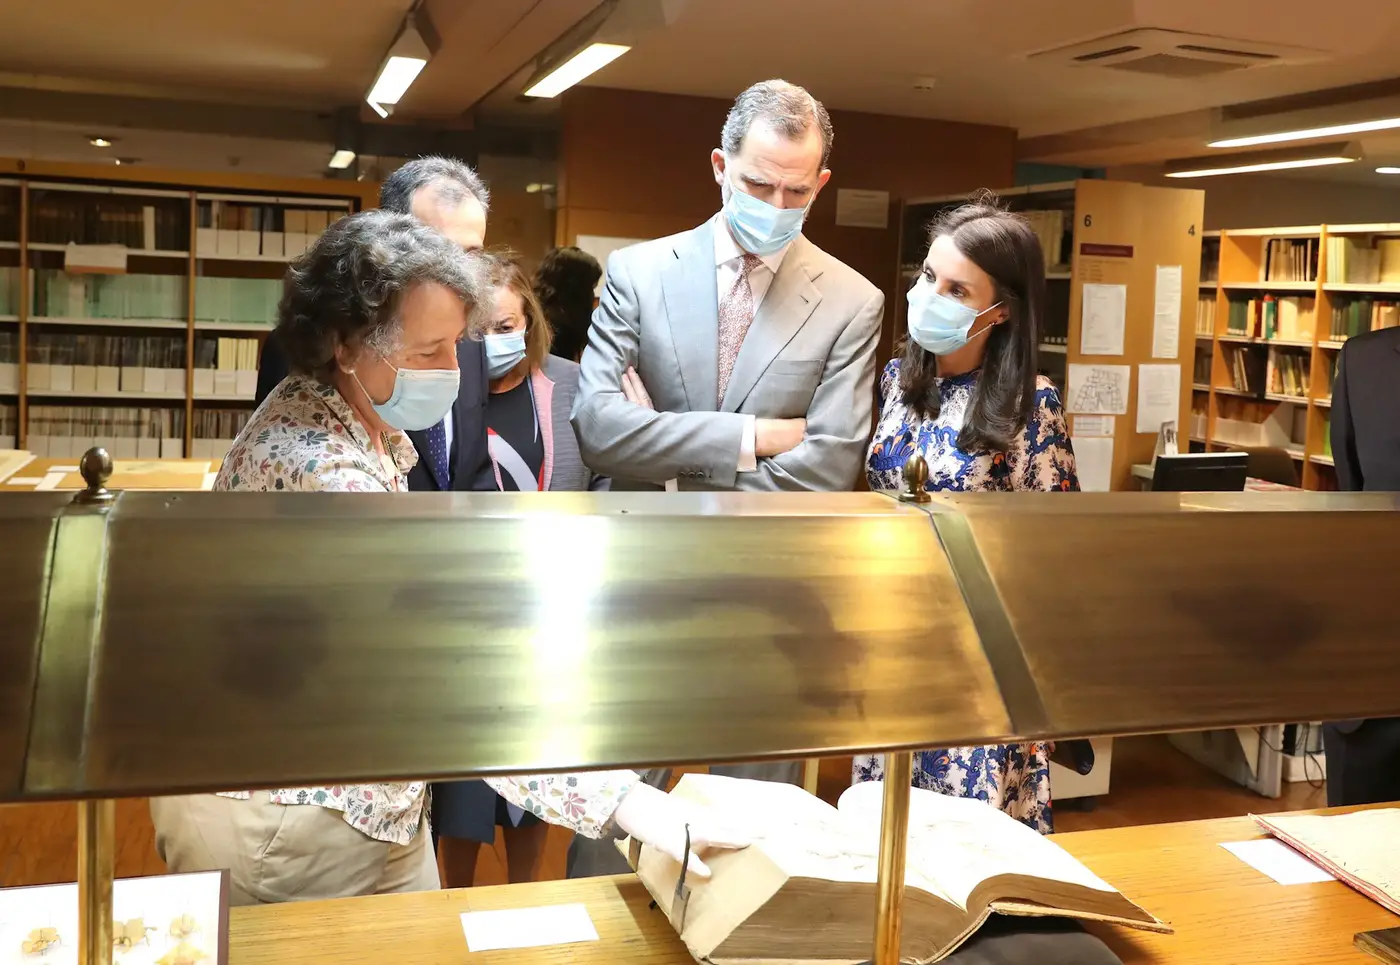 King Felipe and Queen Letizia during their tour of the Reading room at the Nautral Sciences Museum